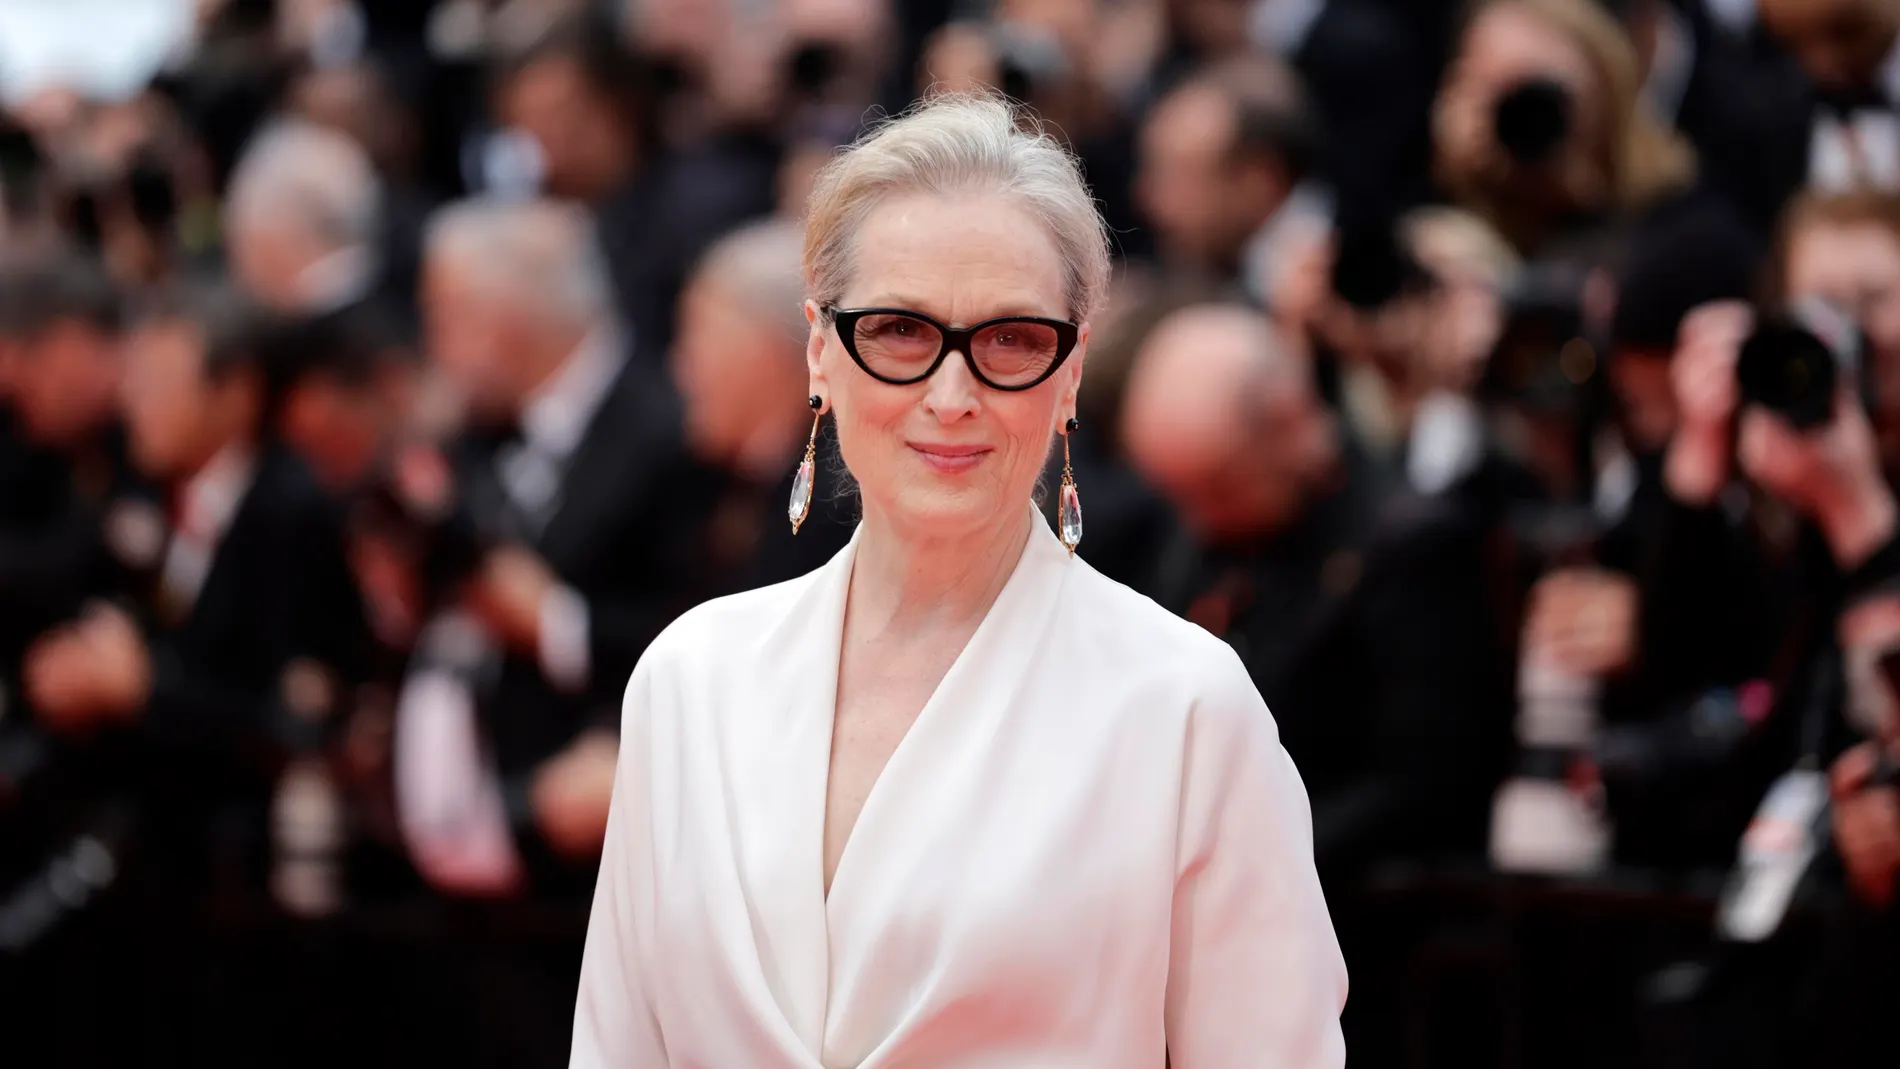 Cannes (France), 14/05/2024.- Meryl Streep attends the 'Le Deuxieme Acte' (The Second Act) screening and opening ceremony of the 77th annual Cannes Film Festival, in Cannes, France, 14 May 2024. The film festival runs from 14 to 25 May 2024. (Cine, Francia) EFE/EPA/GUILLAUME HORCAJUELO